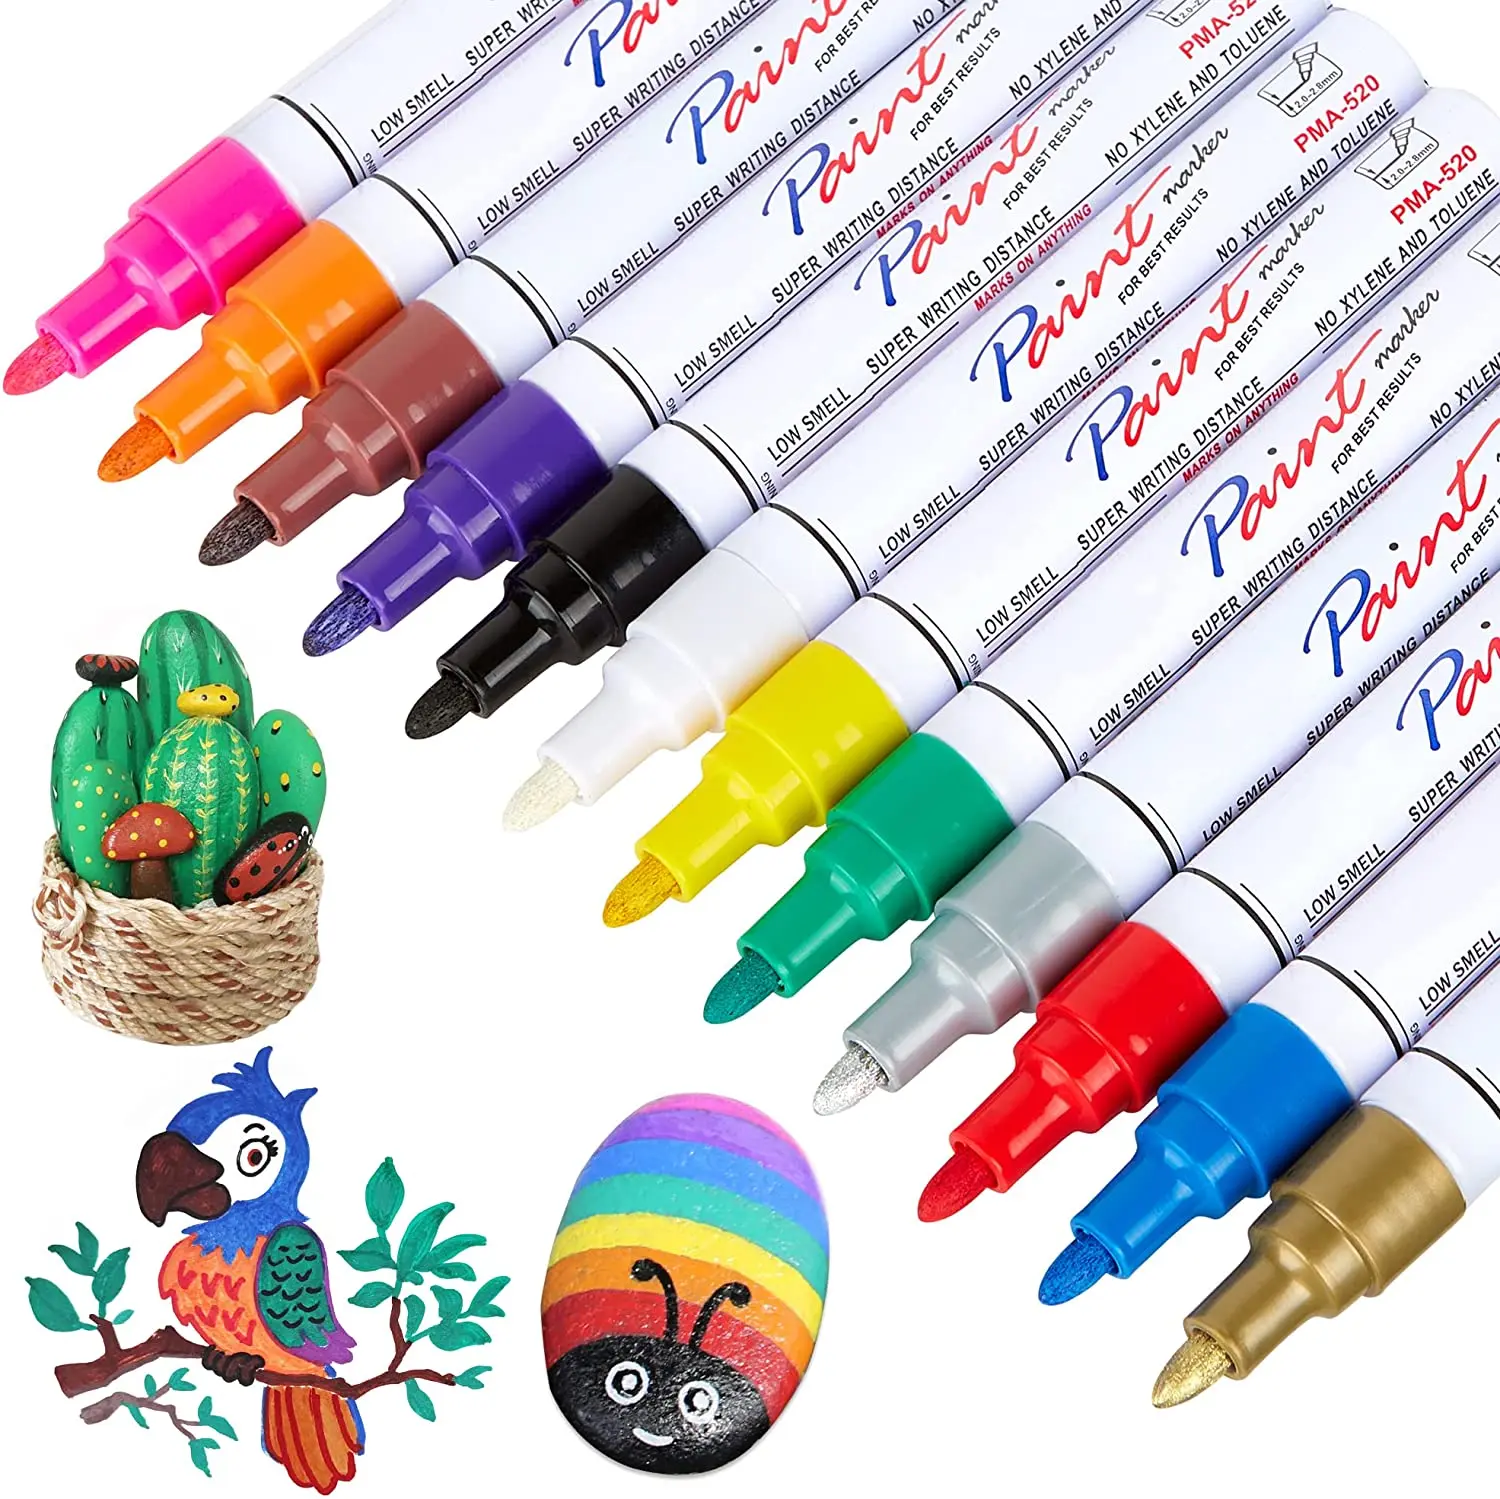 Paint Markers 24 Colors Oil-Based Paint Pens Paint Markers Waterproof Never  Fade,Quick Dry Permanent Marker Pen Set For Rocks